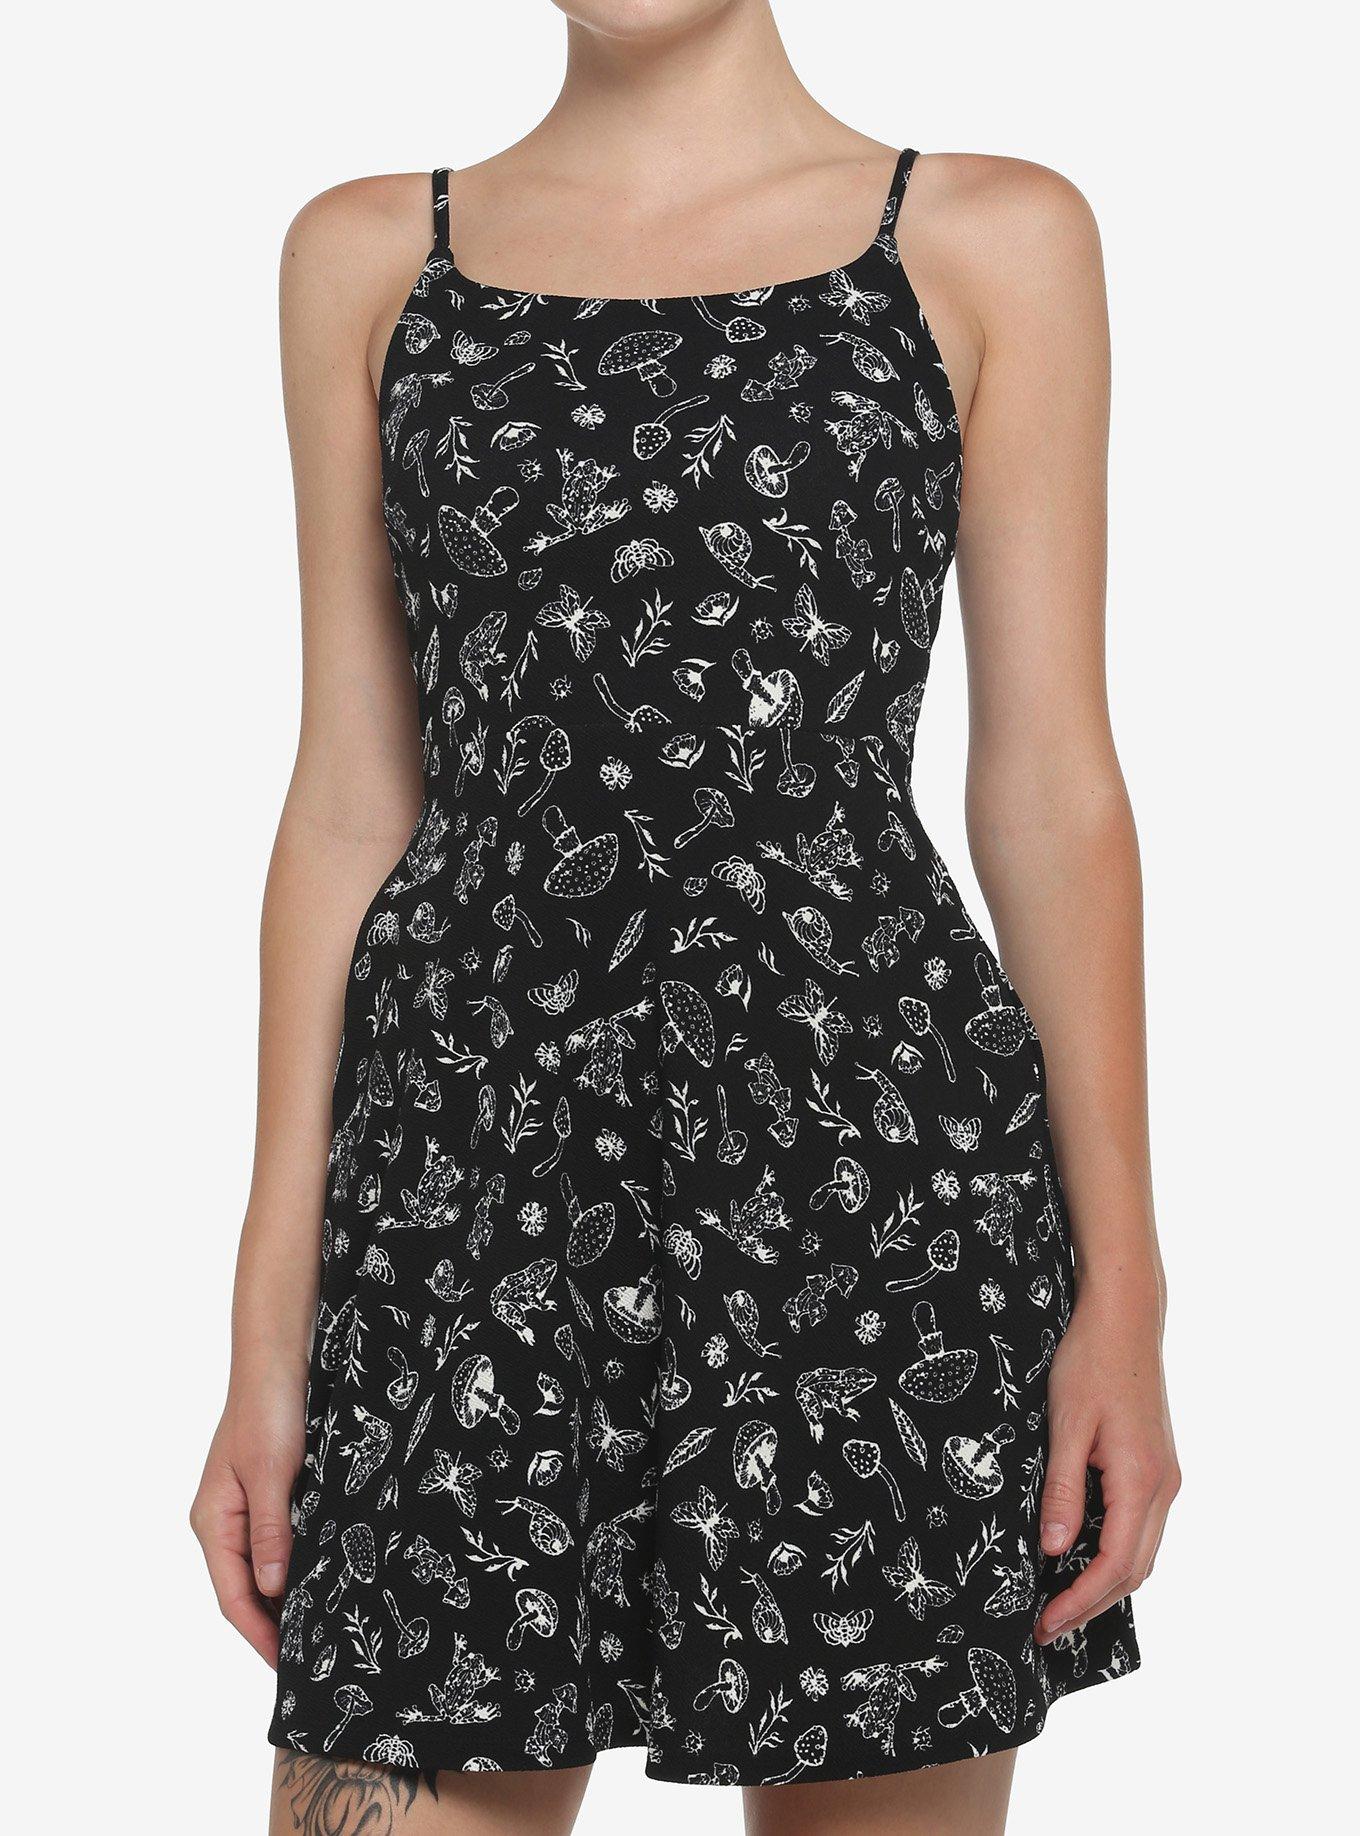 Hot Topic Thorn & Fable® Green Rose Twofer Dress Plus